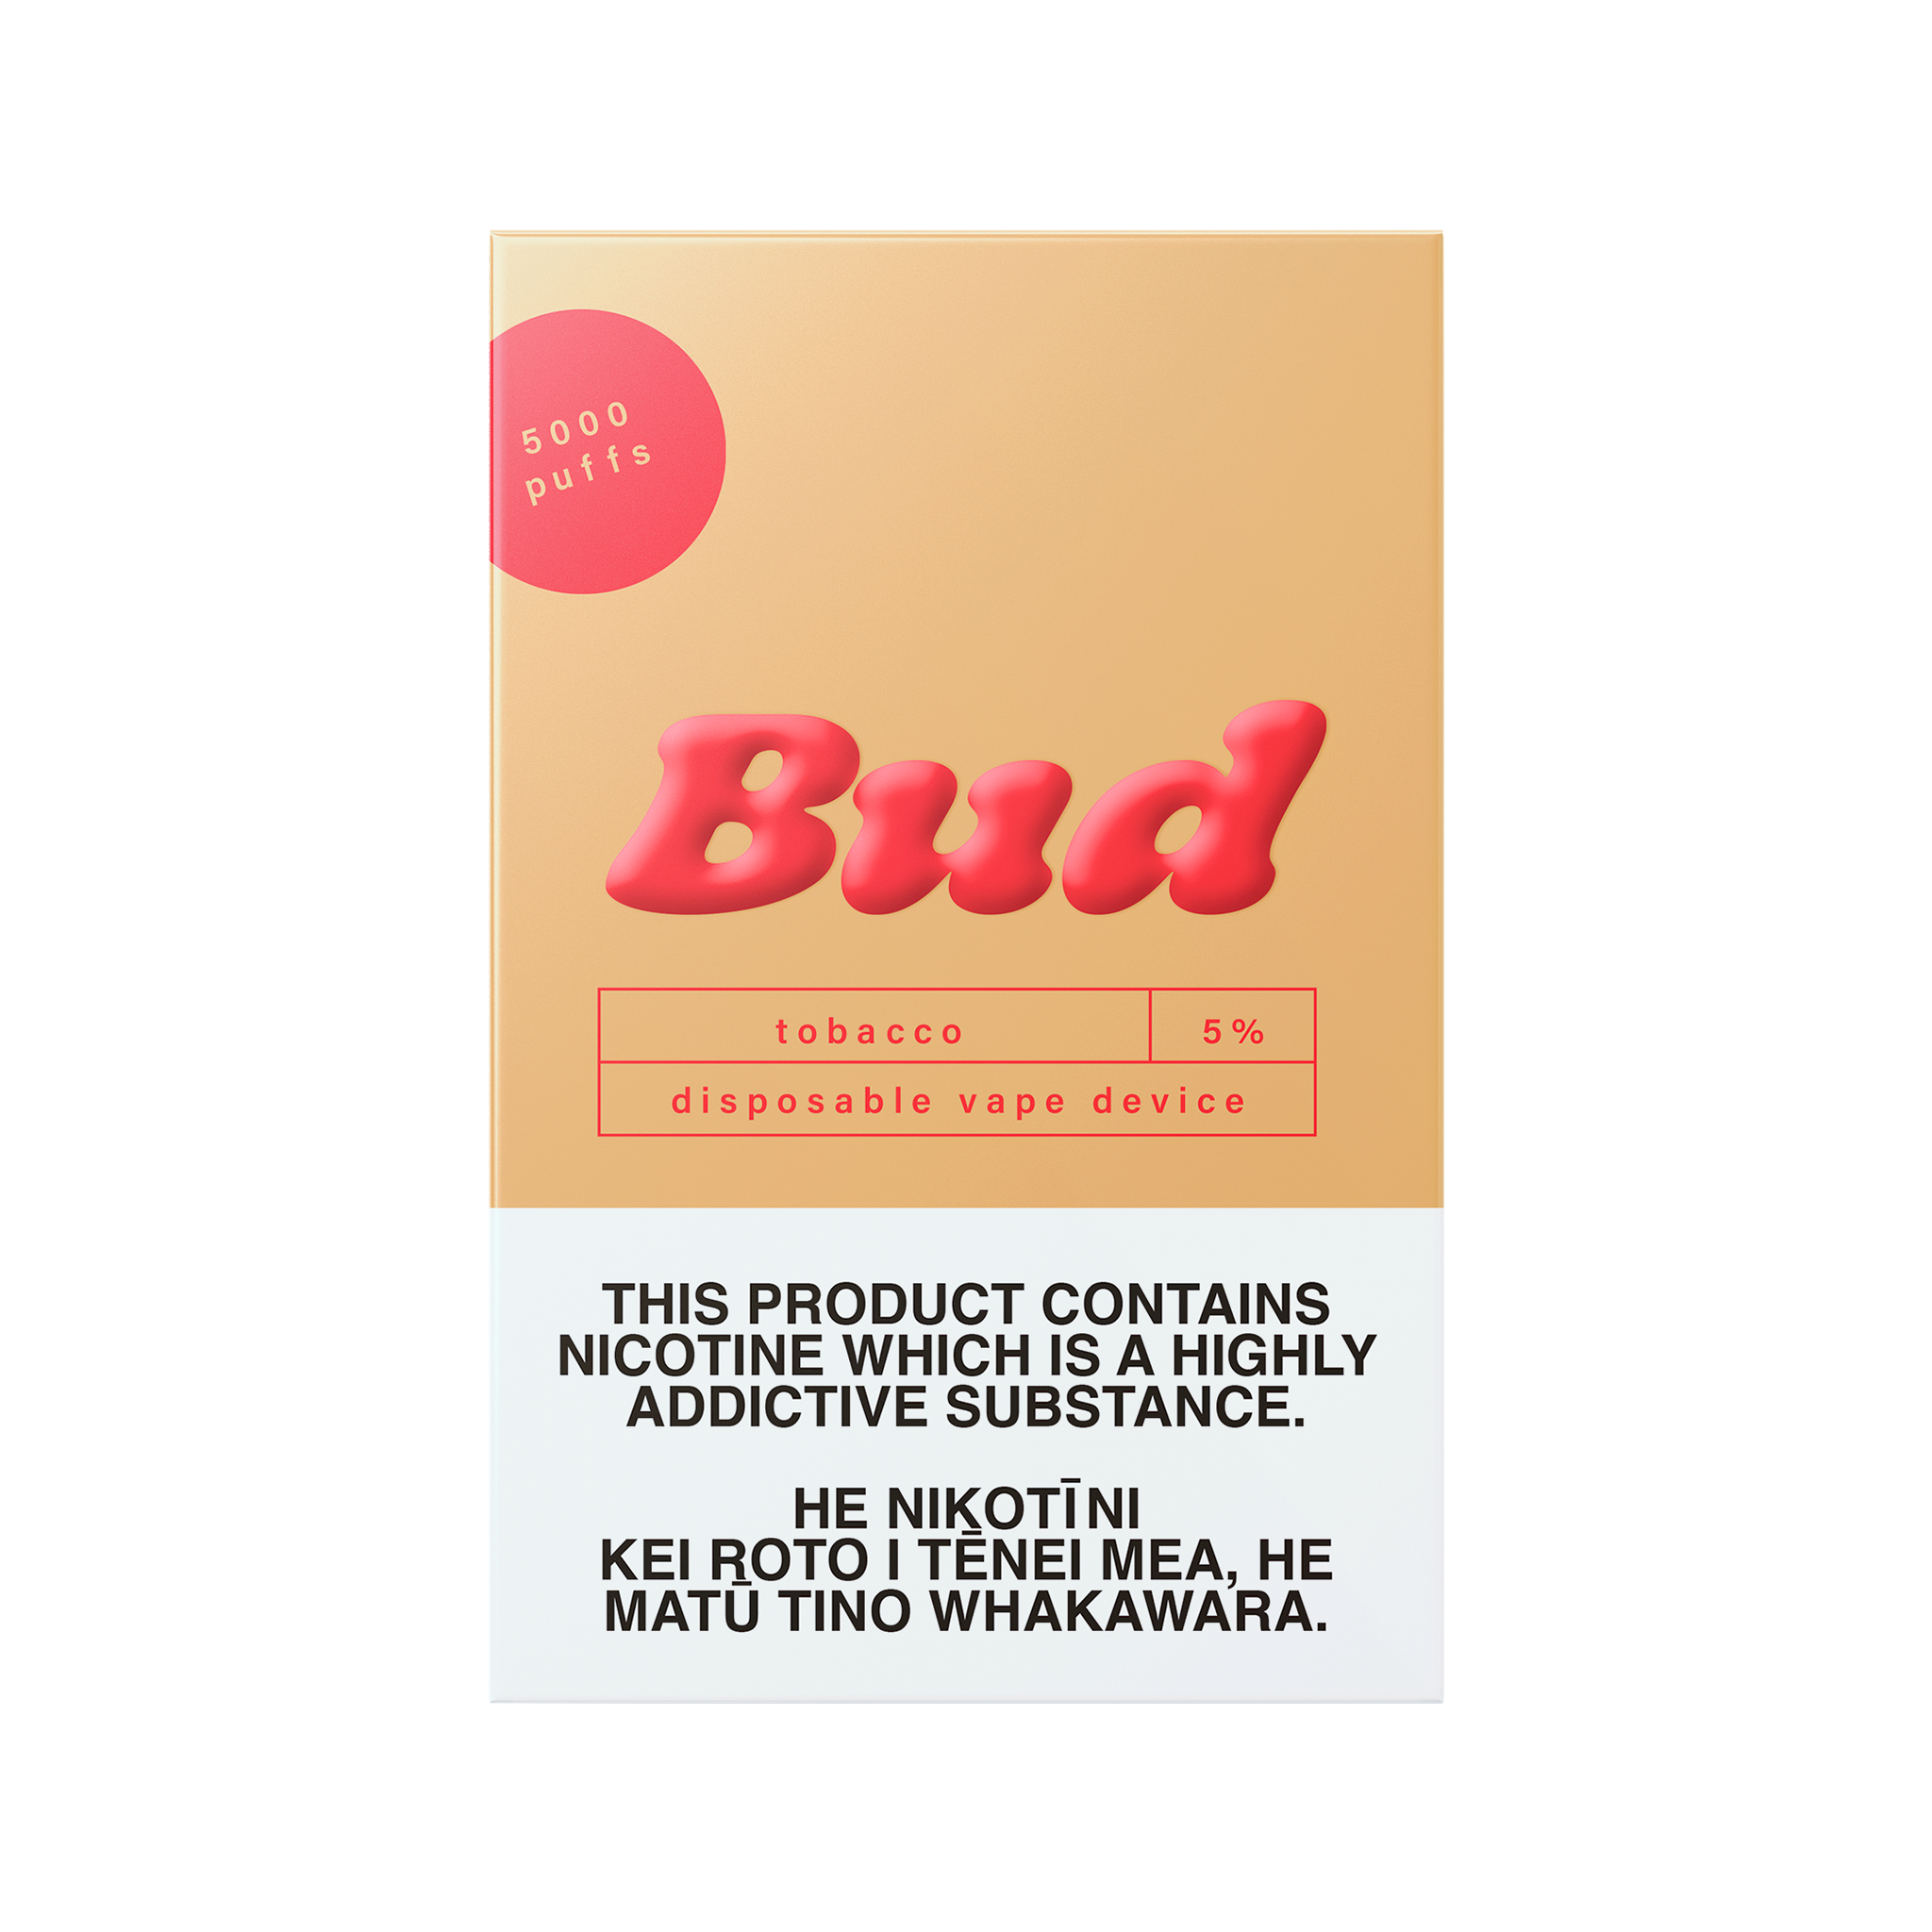 Tobacco Disposable Vape by Bud box